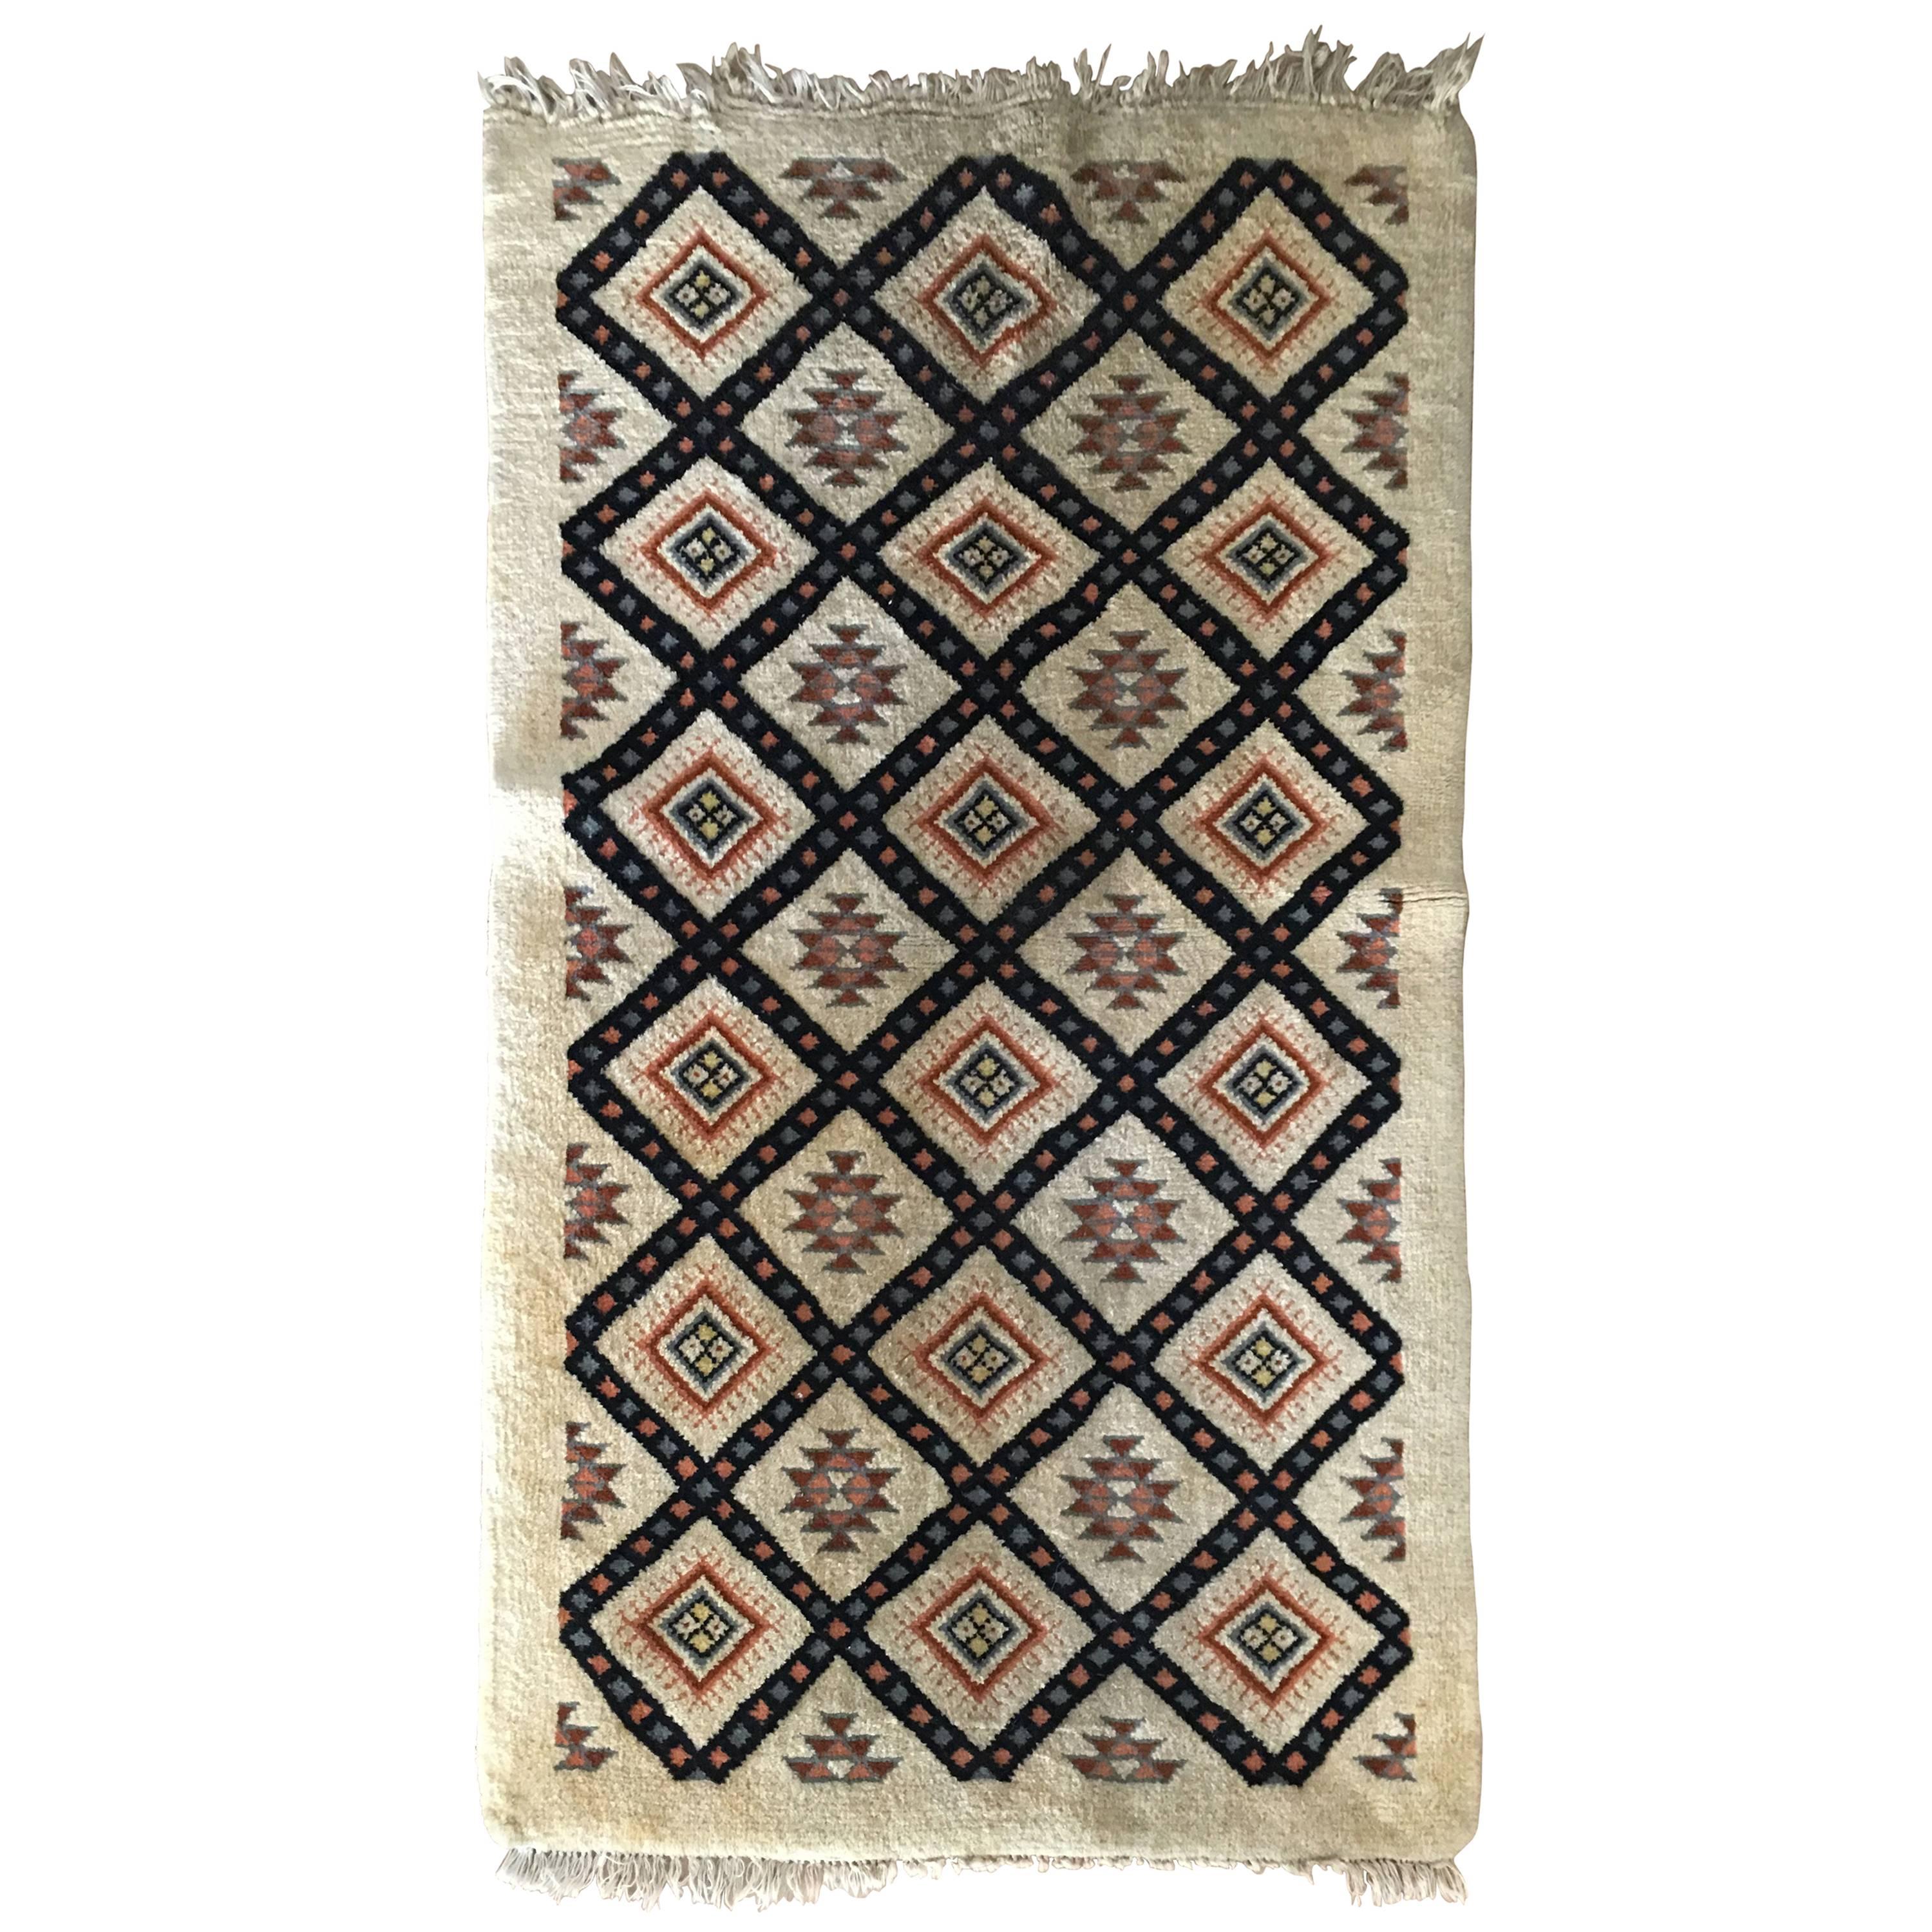 Moroccan Abstract Tribal Design Wool Carpet/Rug